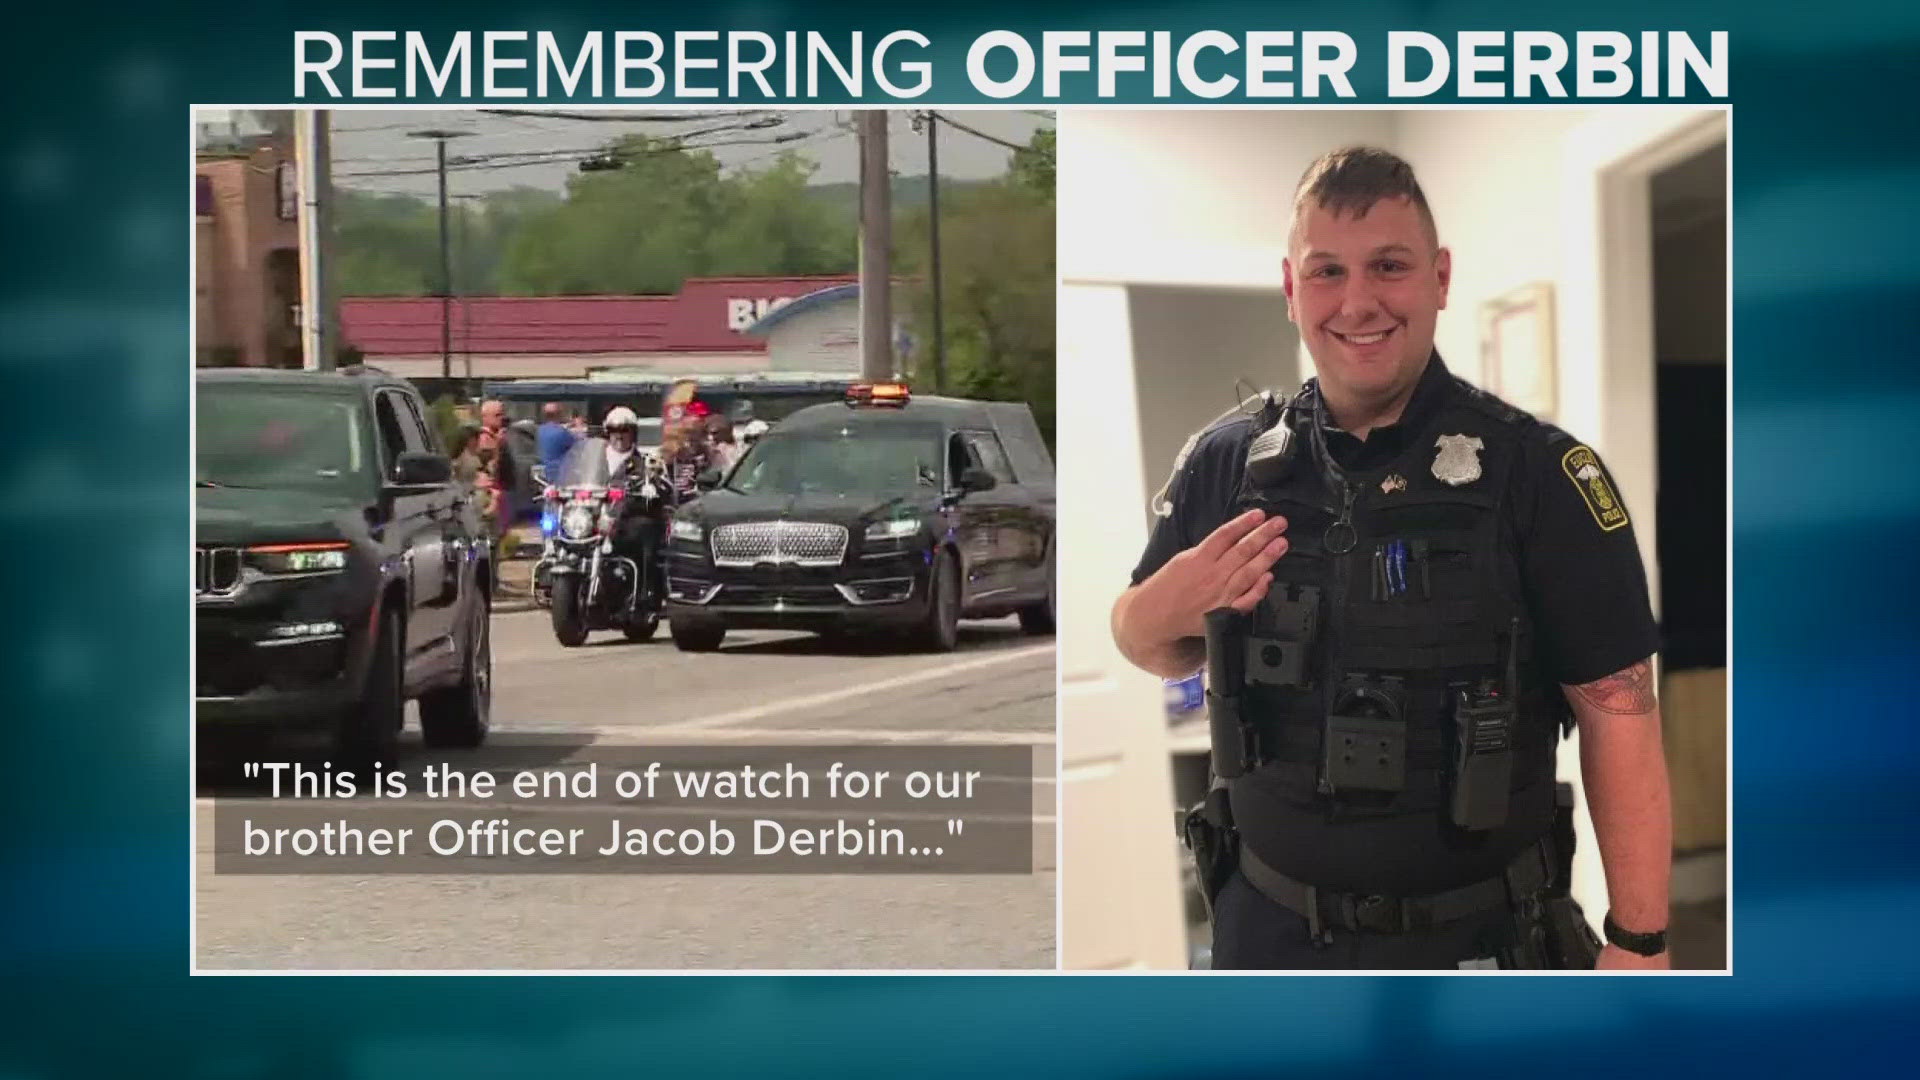 Derbin will posthumously receive the Euclid Police Department's Medal of Honor for his actions on the night he was killed in the line of duty.